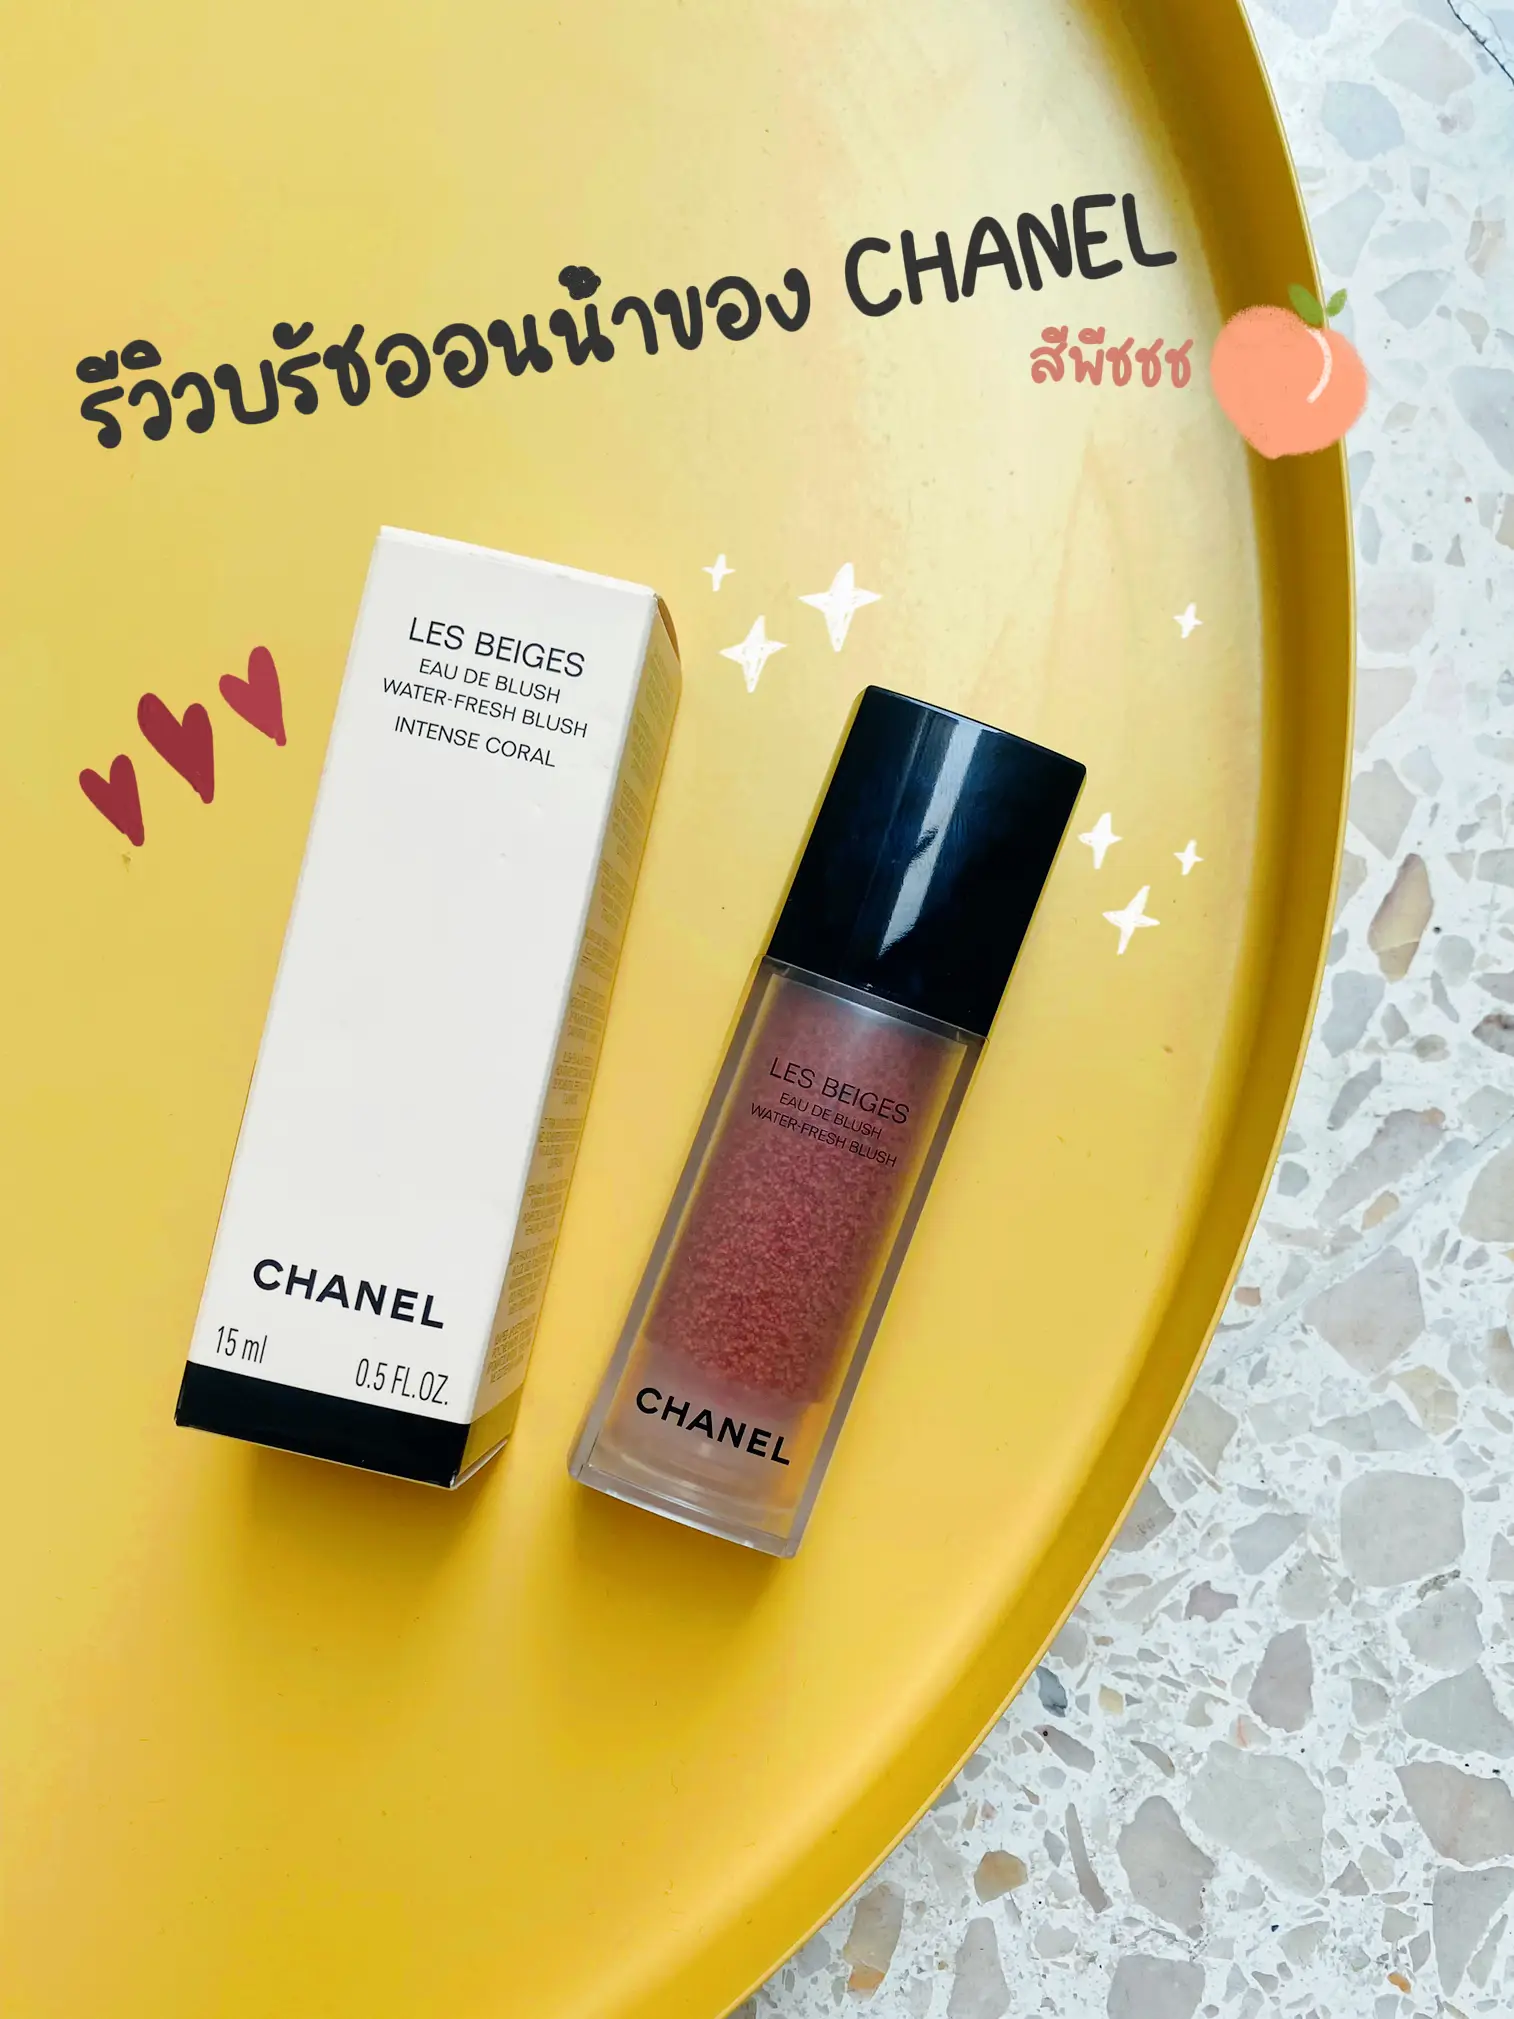 CHANEL WATER BRUSH REVIEW, Gallery posted by Satangpattara